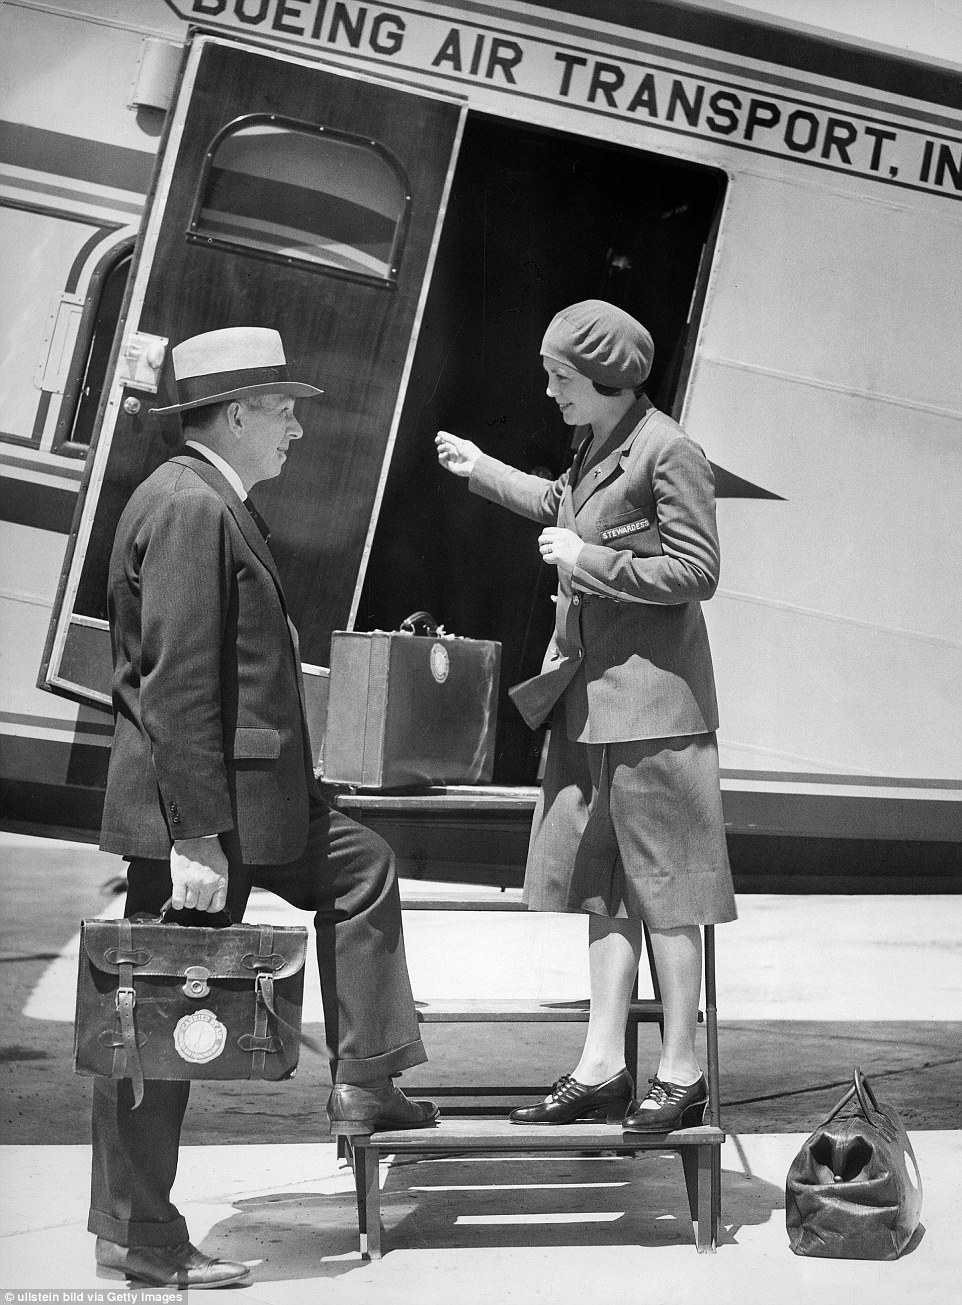 Church stands on airplane step welcoming a crew member holding a briefcase